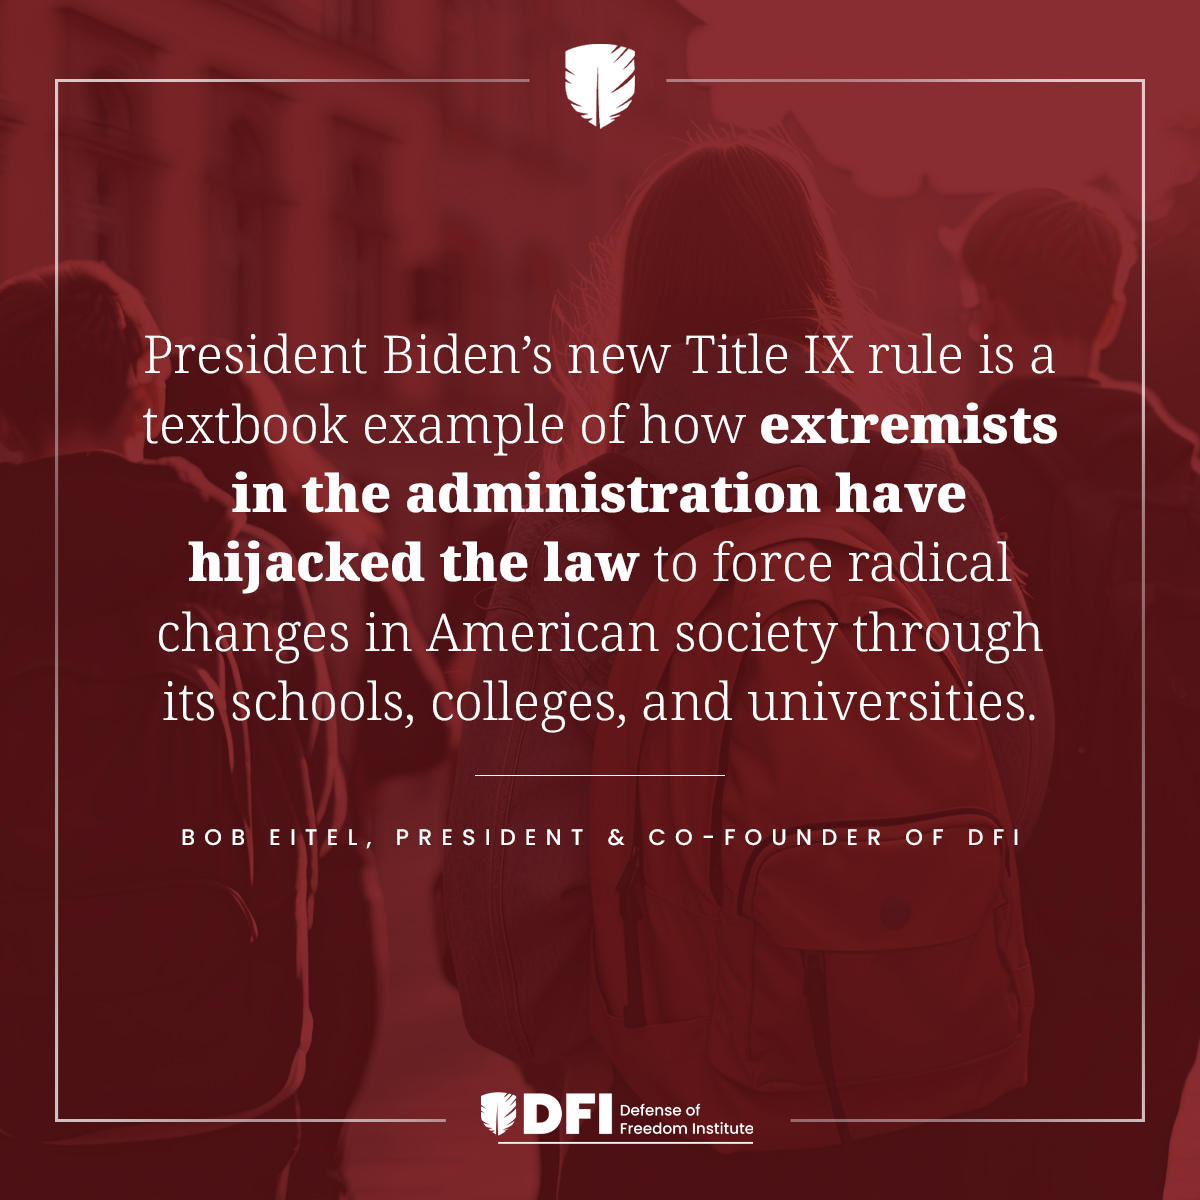 A statement from DFI Co-Founder and President Bob Eitel on Biden's radical #TitleIX rewrite. View our press release to see the full statement: loom.ly/9OfYFVs